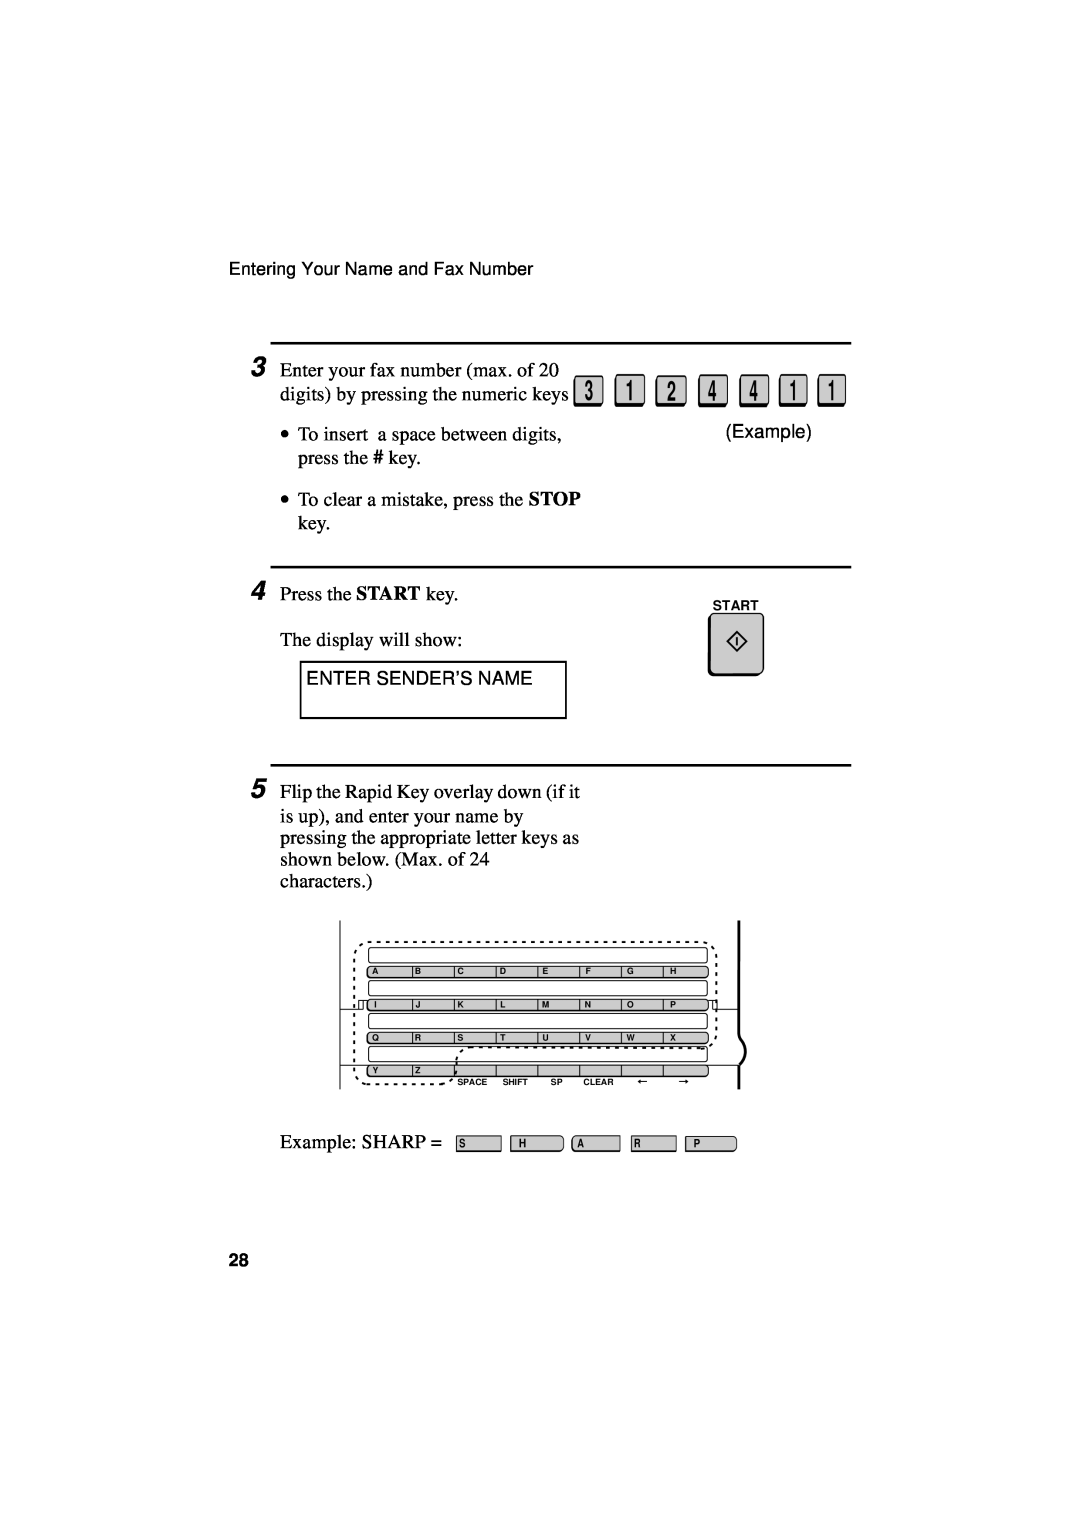 Sharp FO-5700, FO-4700, FO-5550 operation manual Example, Enter Sender’S Name 